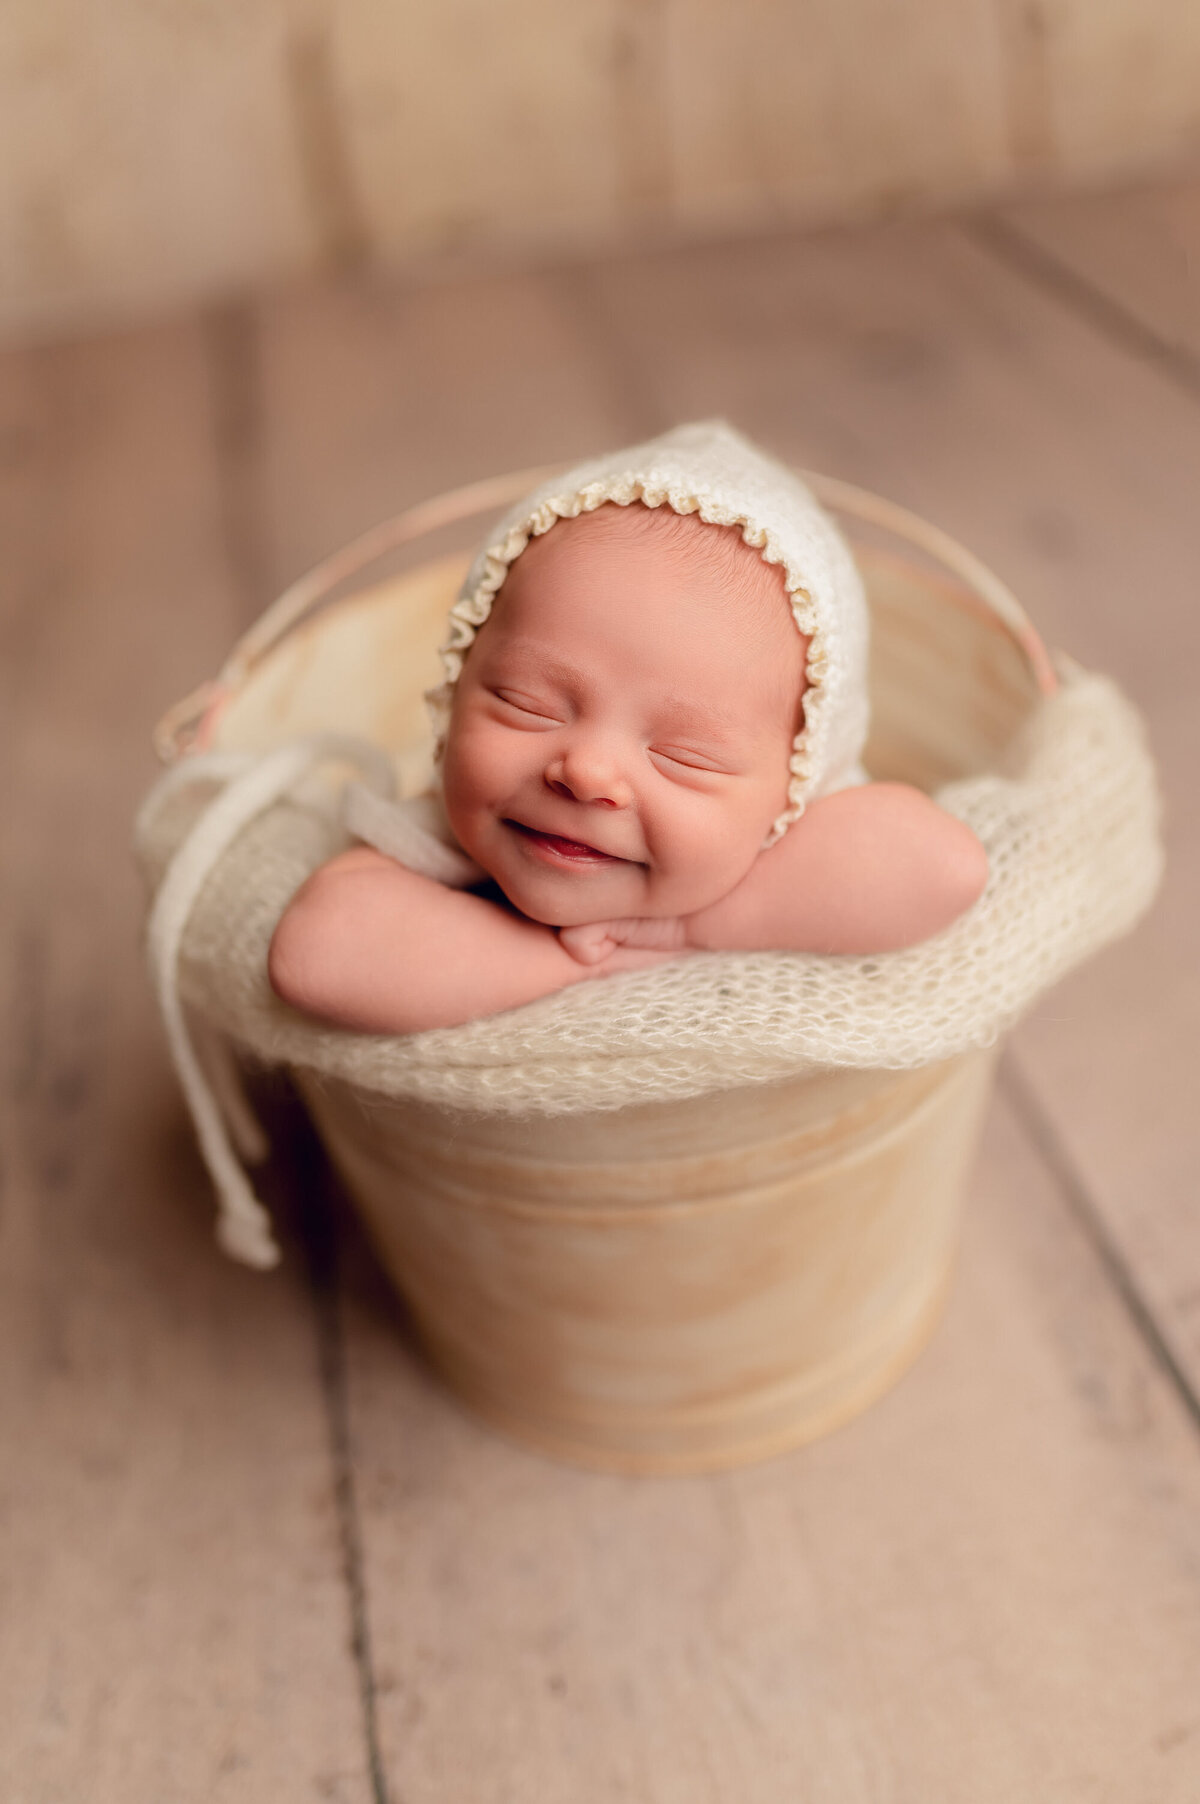 Portrait of infant sleeping in a bucket wearing a knit bonnet and a huge smile.